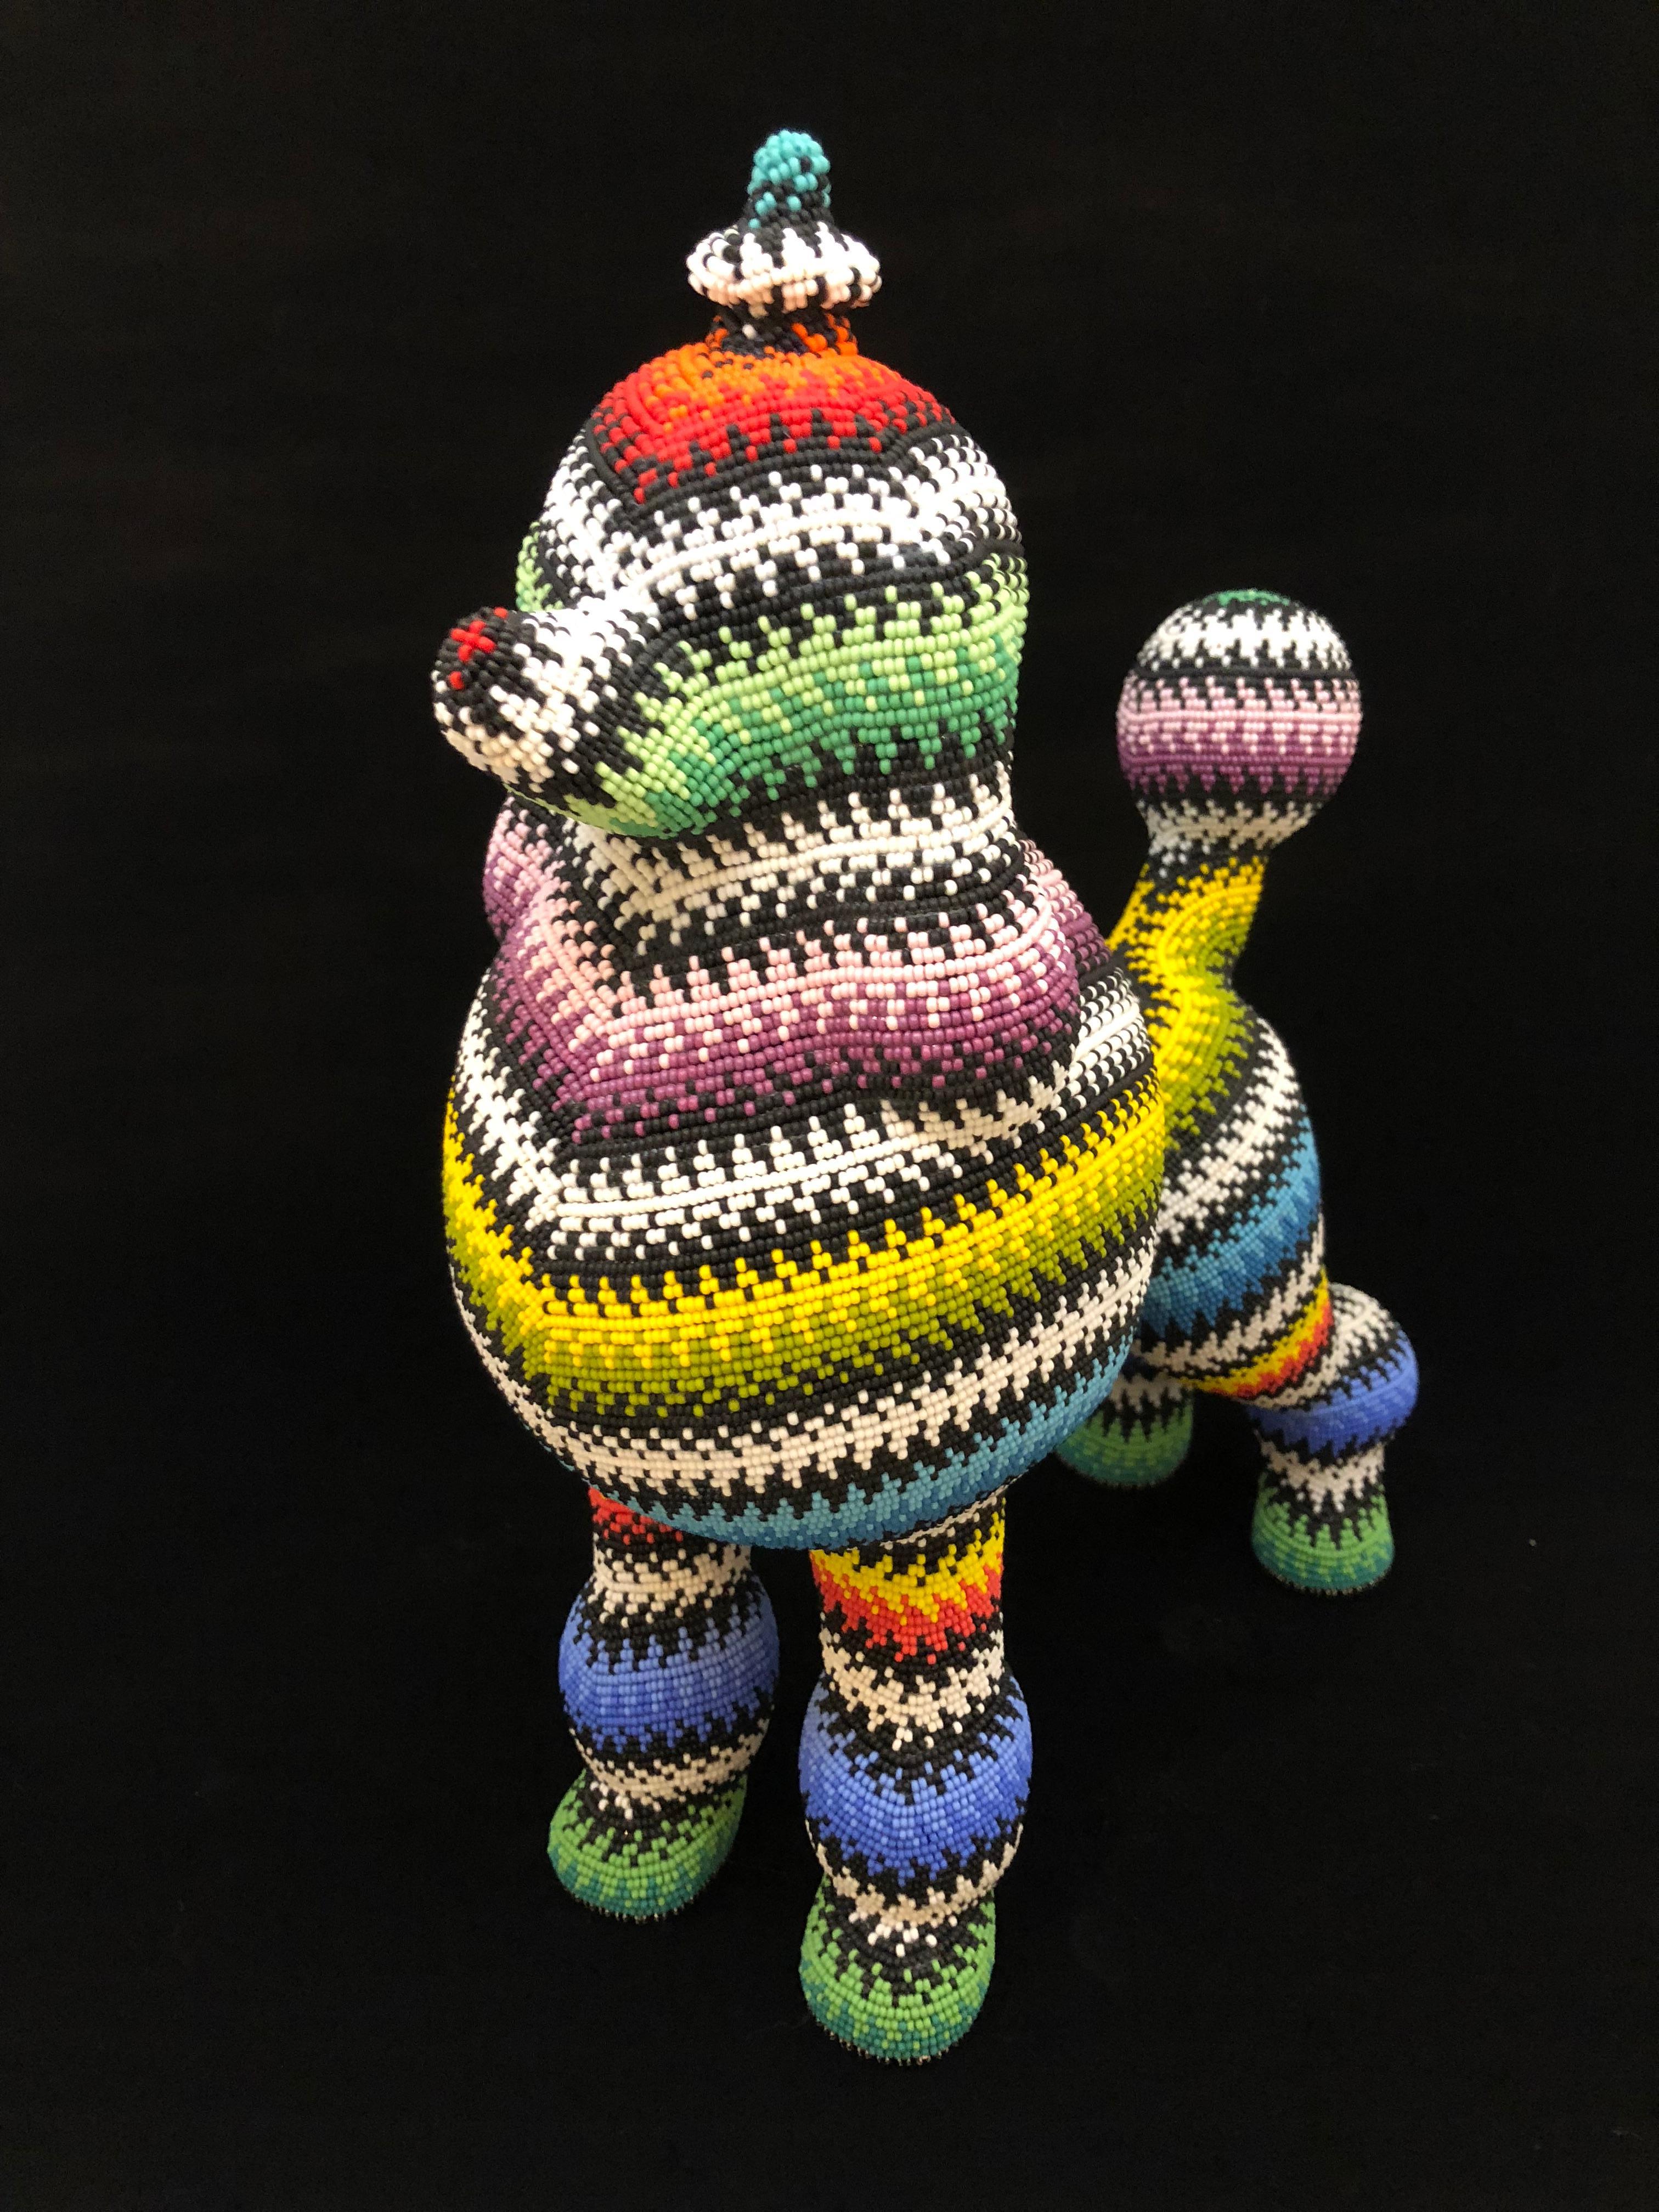 Poodle Form Covered in Glass Czech Seed Beads - Sculpture by Jan Huling